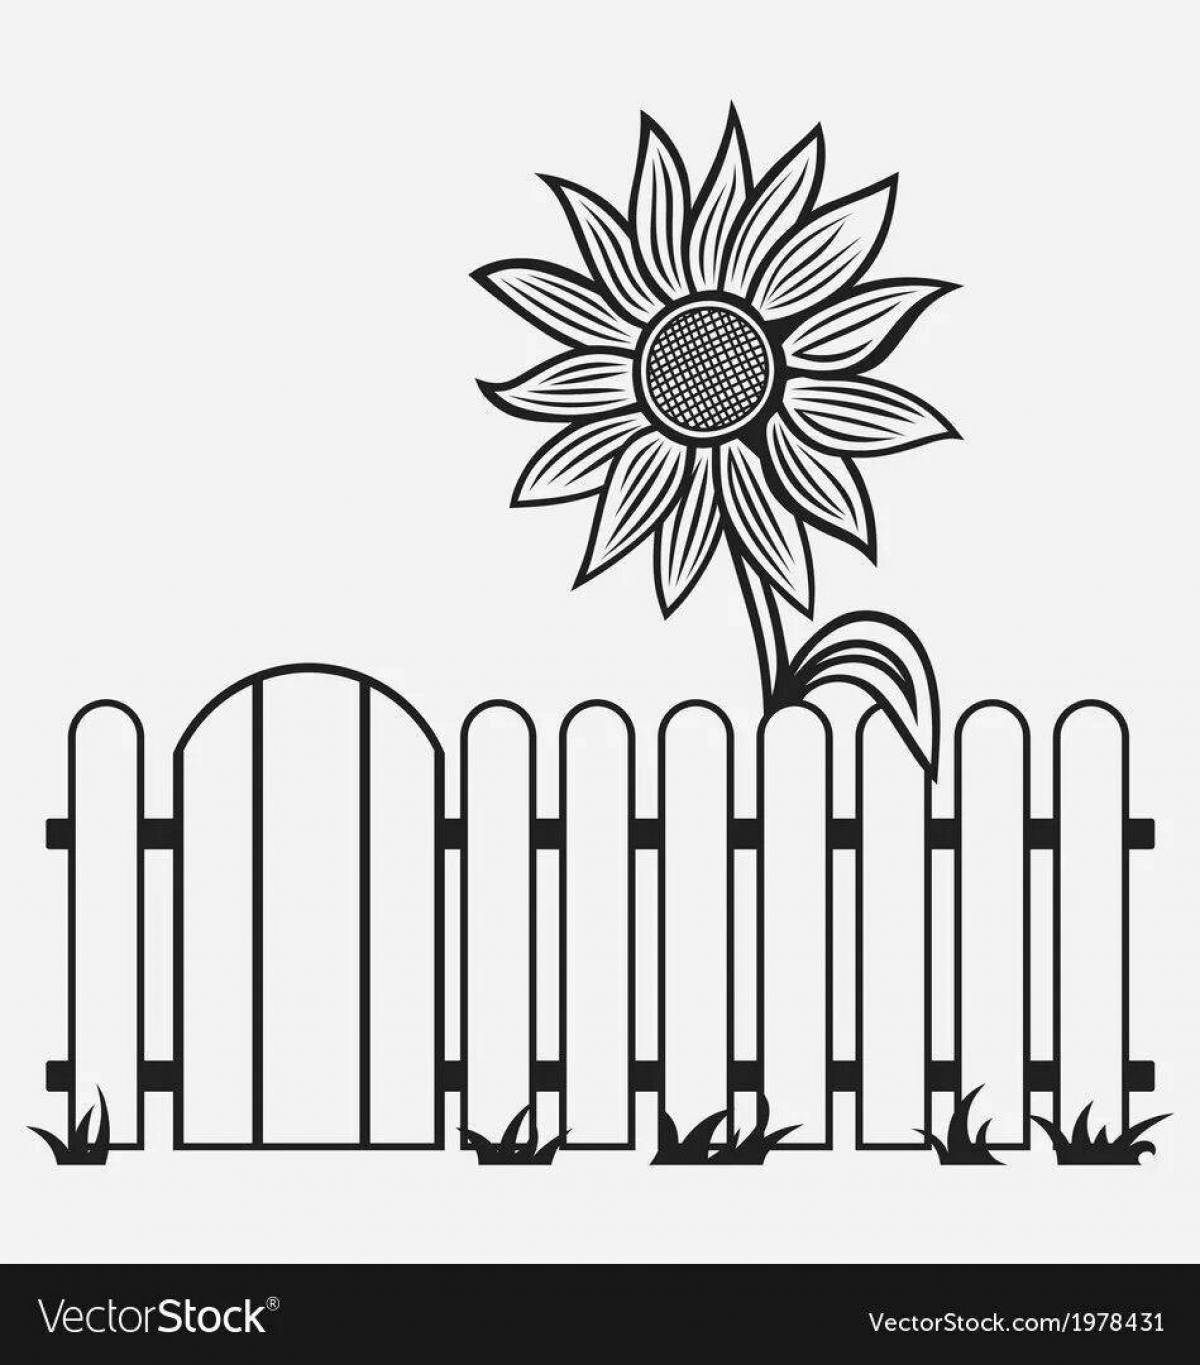 Tempting fence coloring page